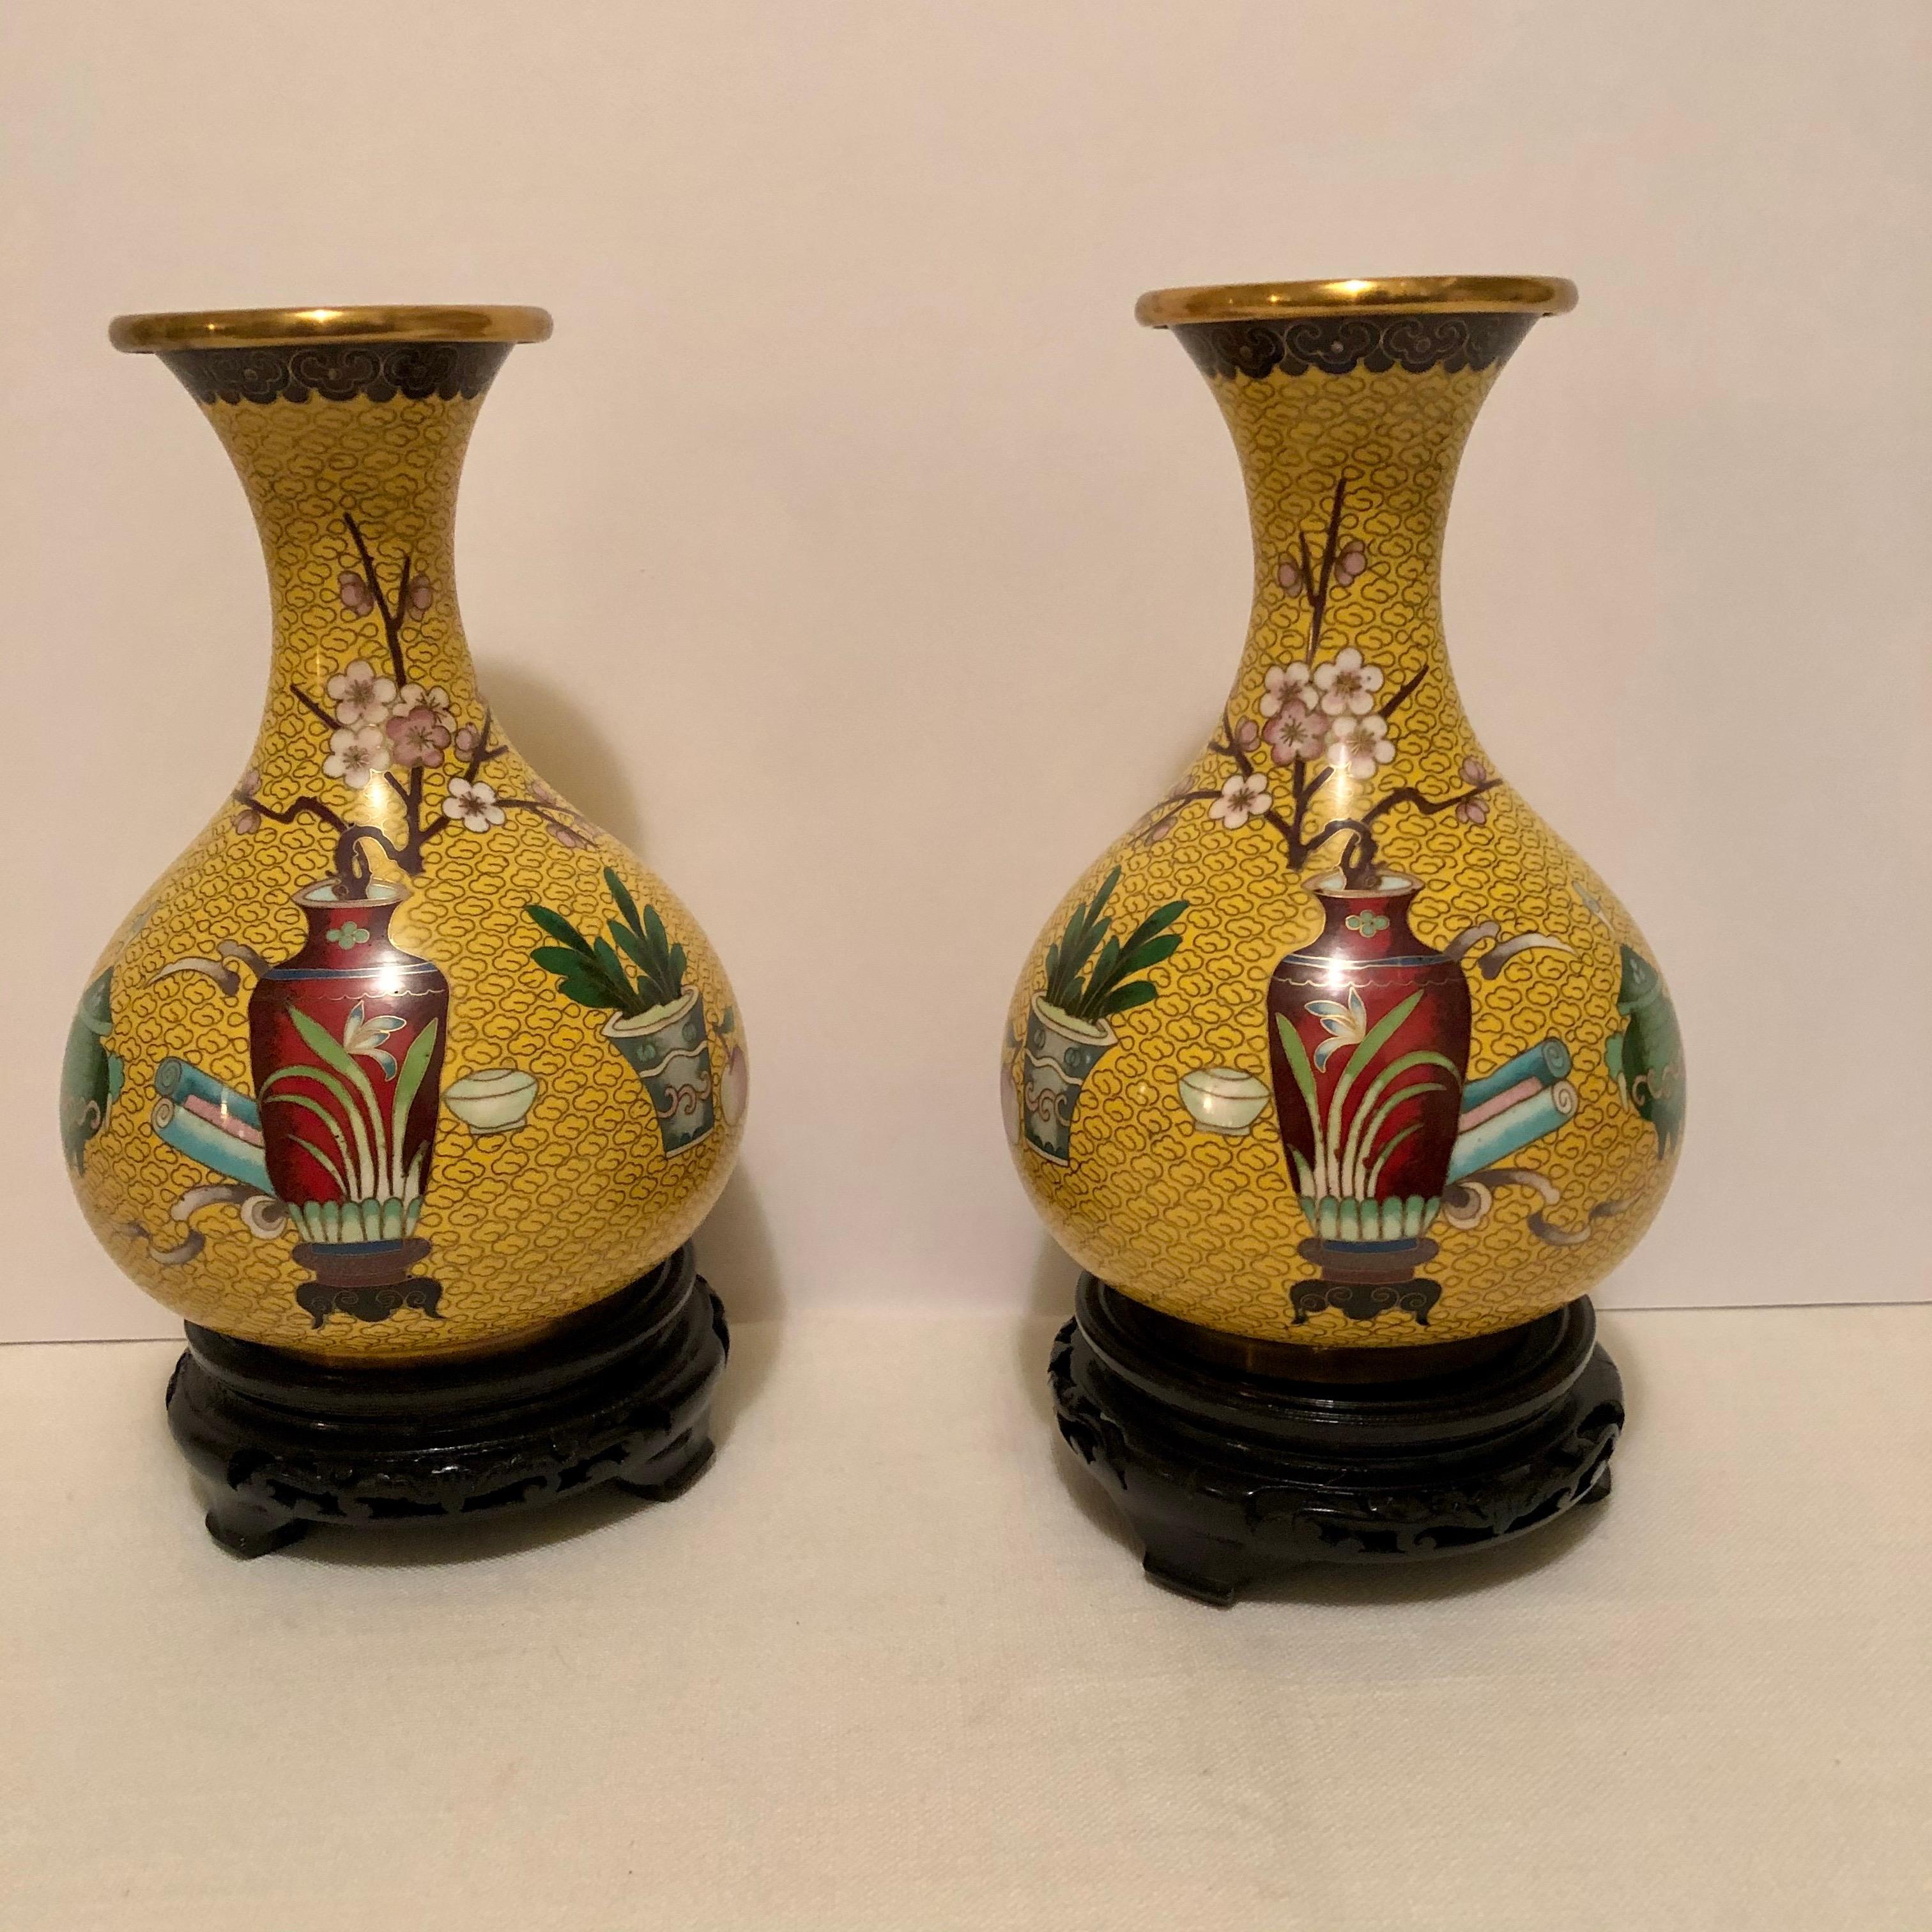 Chinoiserie Pair of Yellow Chinese Cloisonné Vases with a Chinese Red Vase & Prunus Flowers